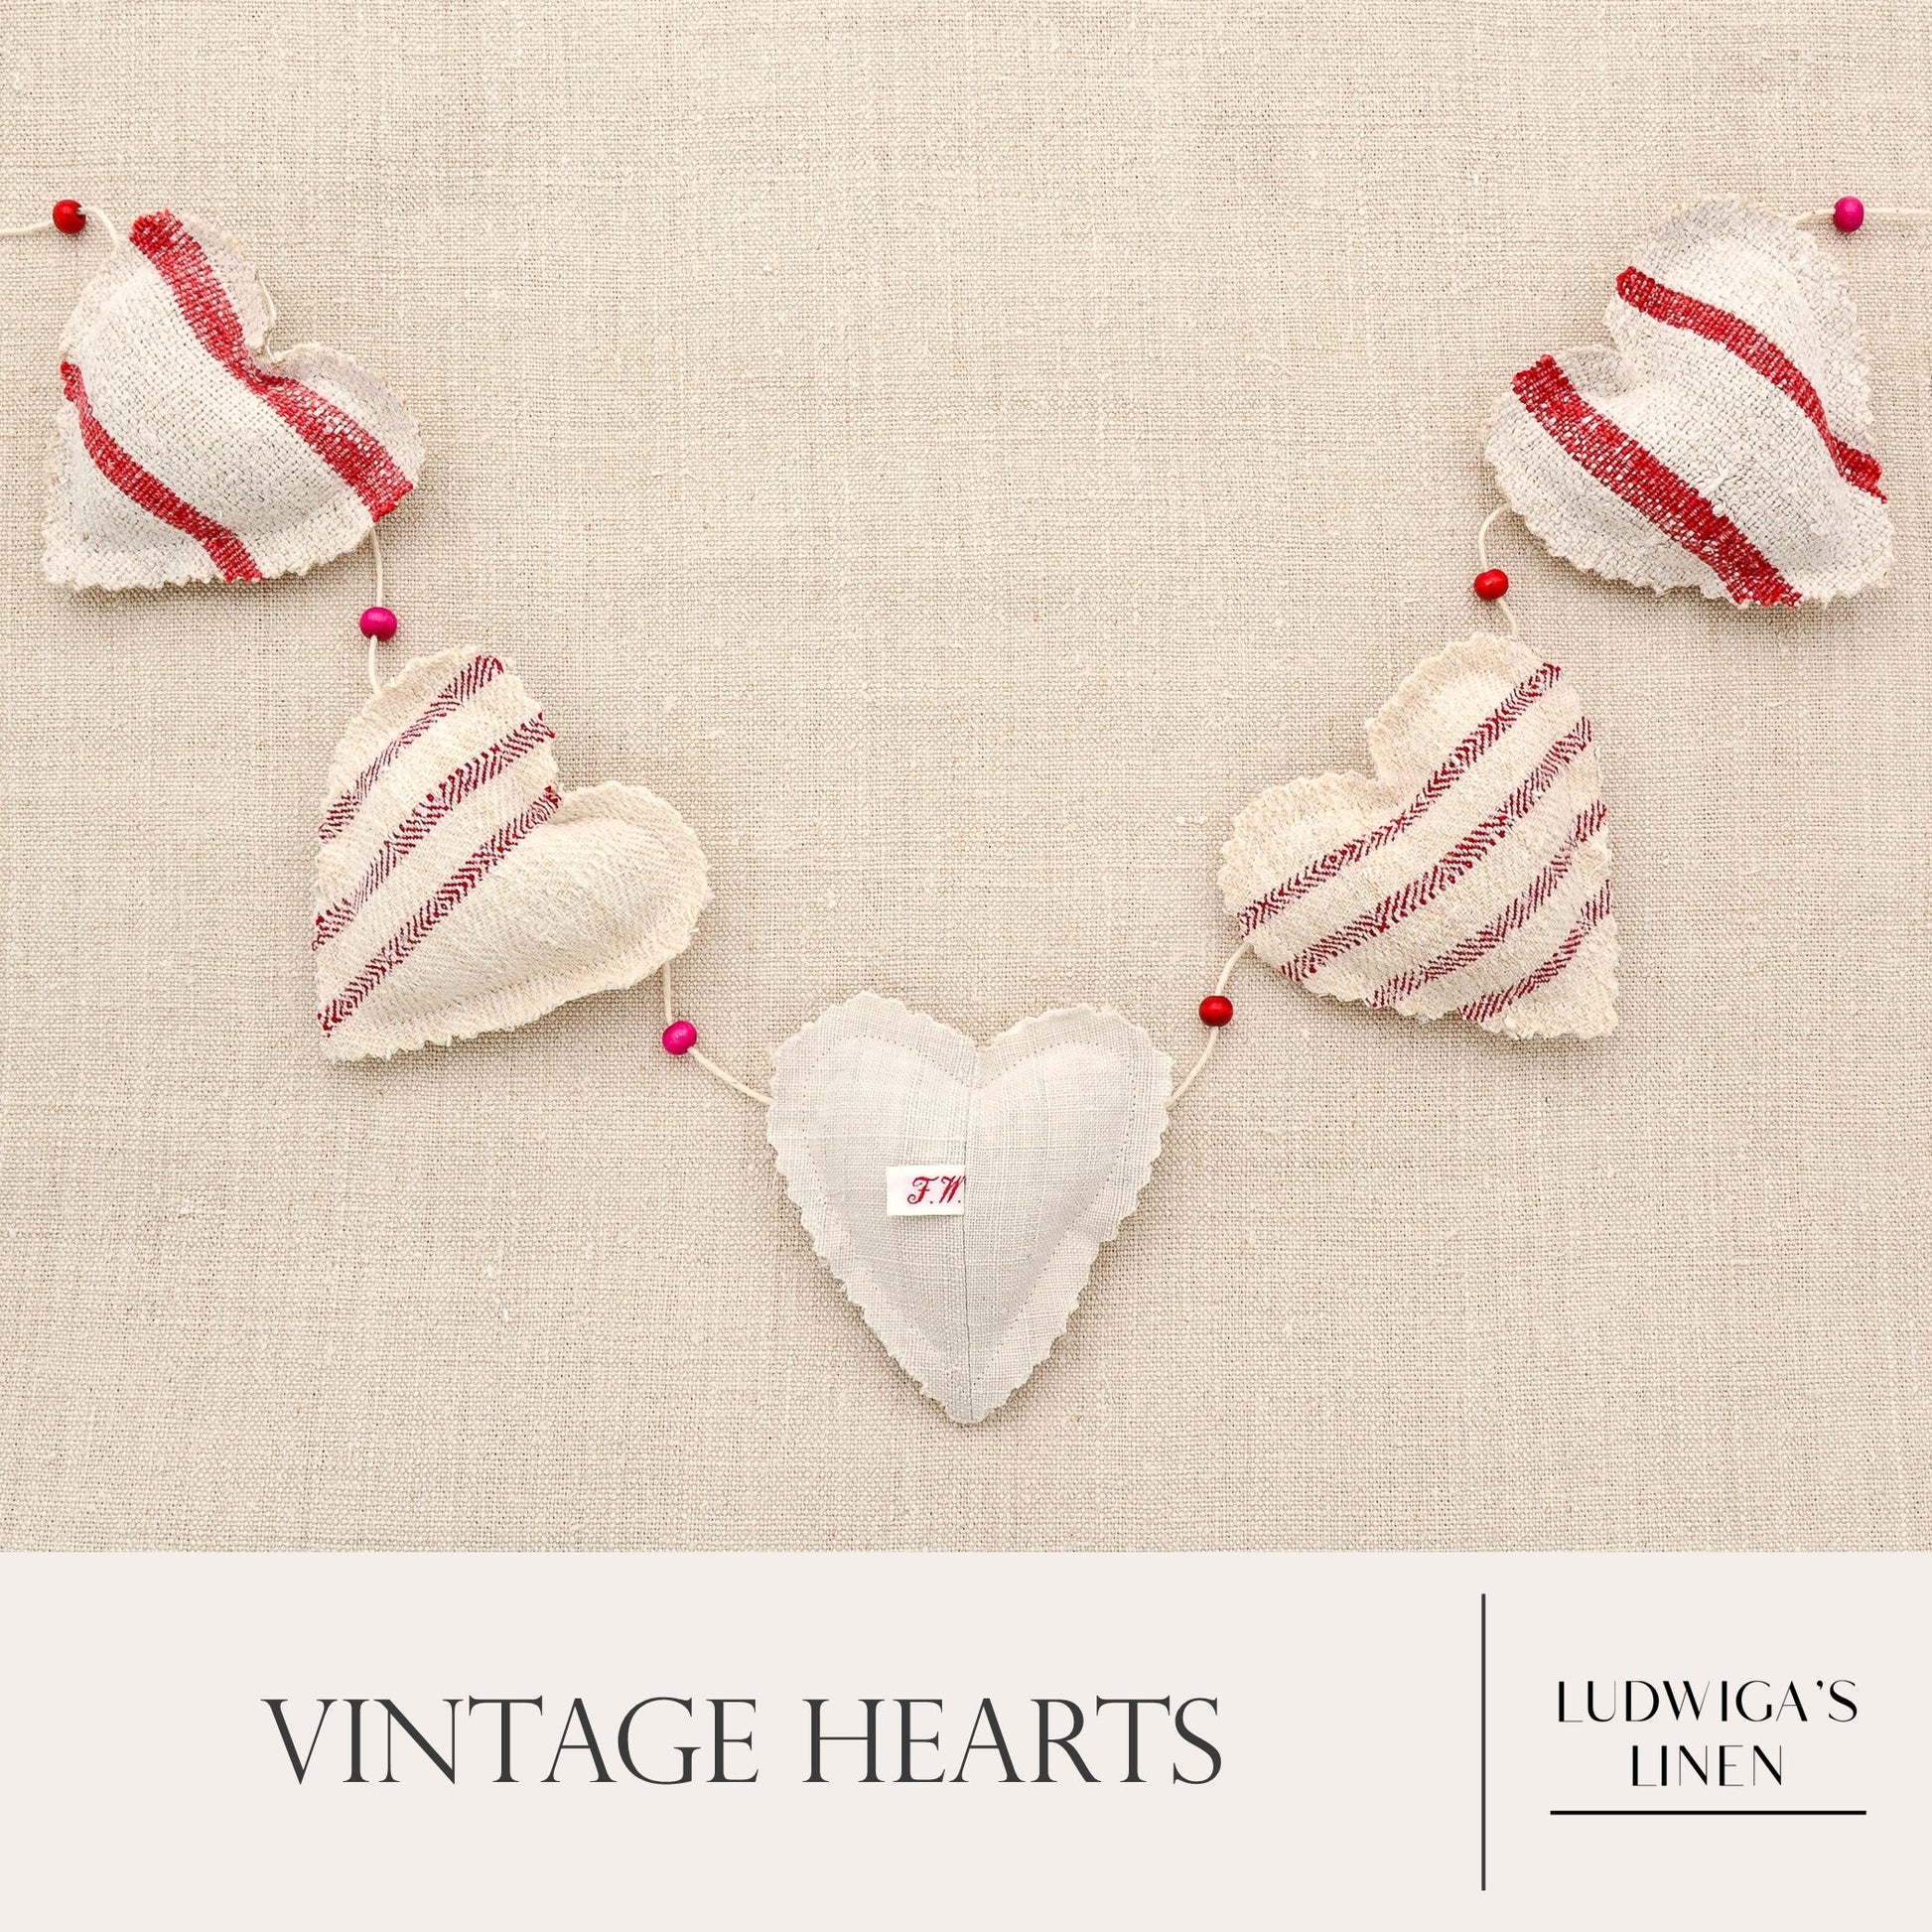 Vintage European grain sack linen garland, five hearts, white cotton twine and wooden beads between hearts